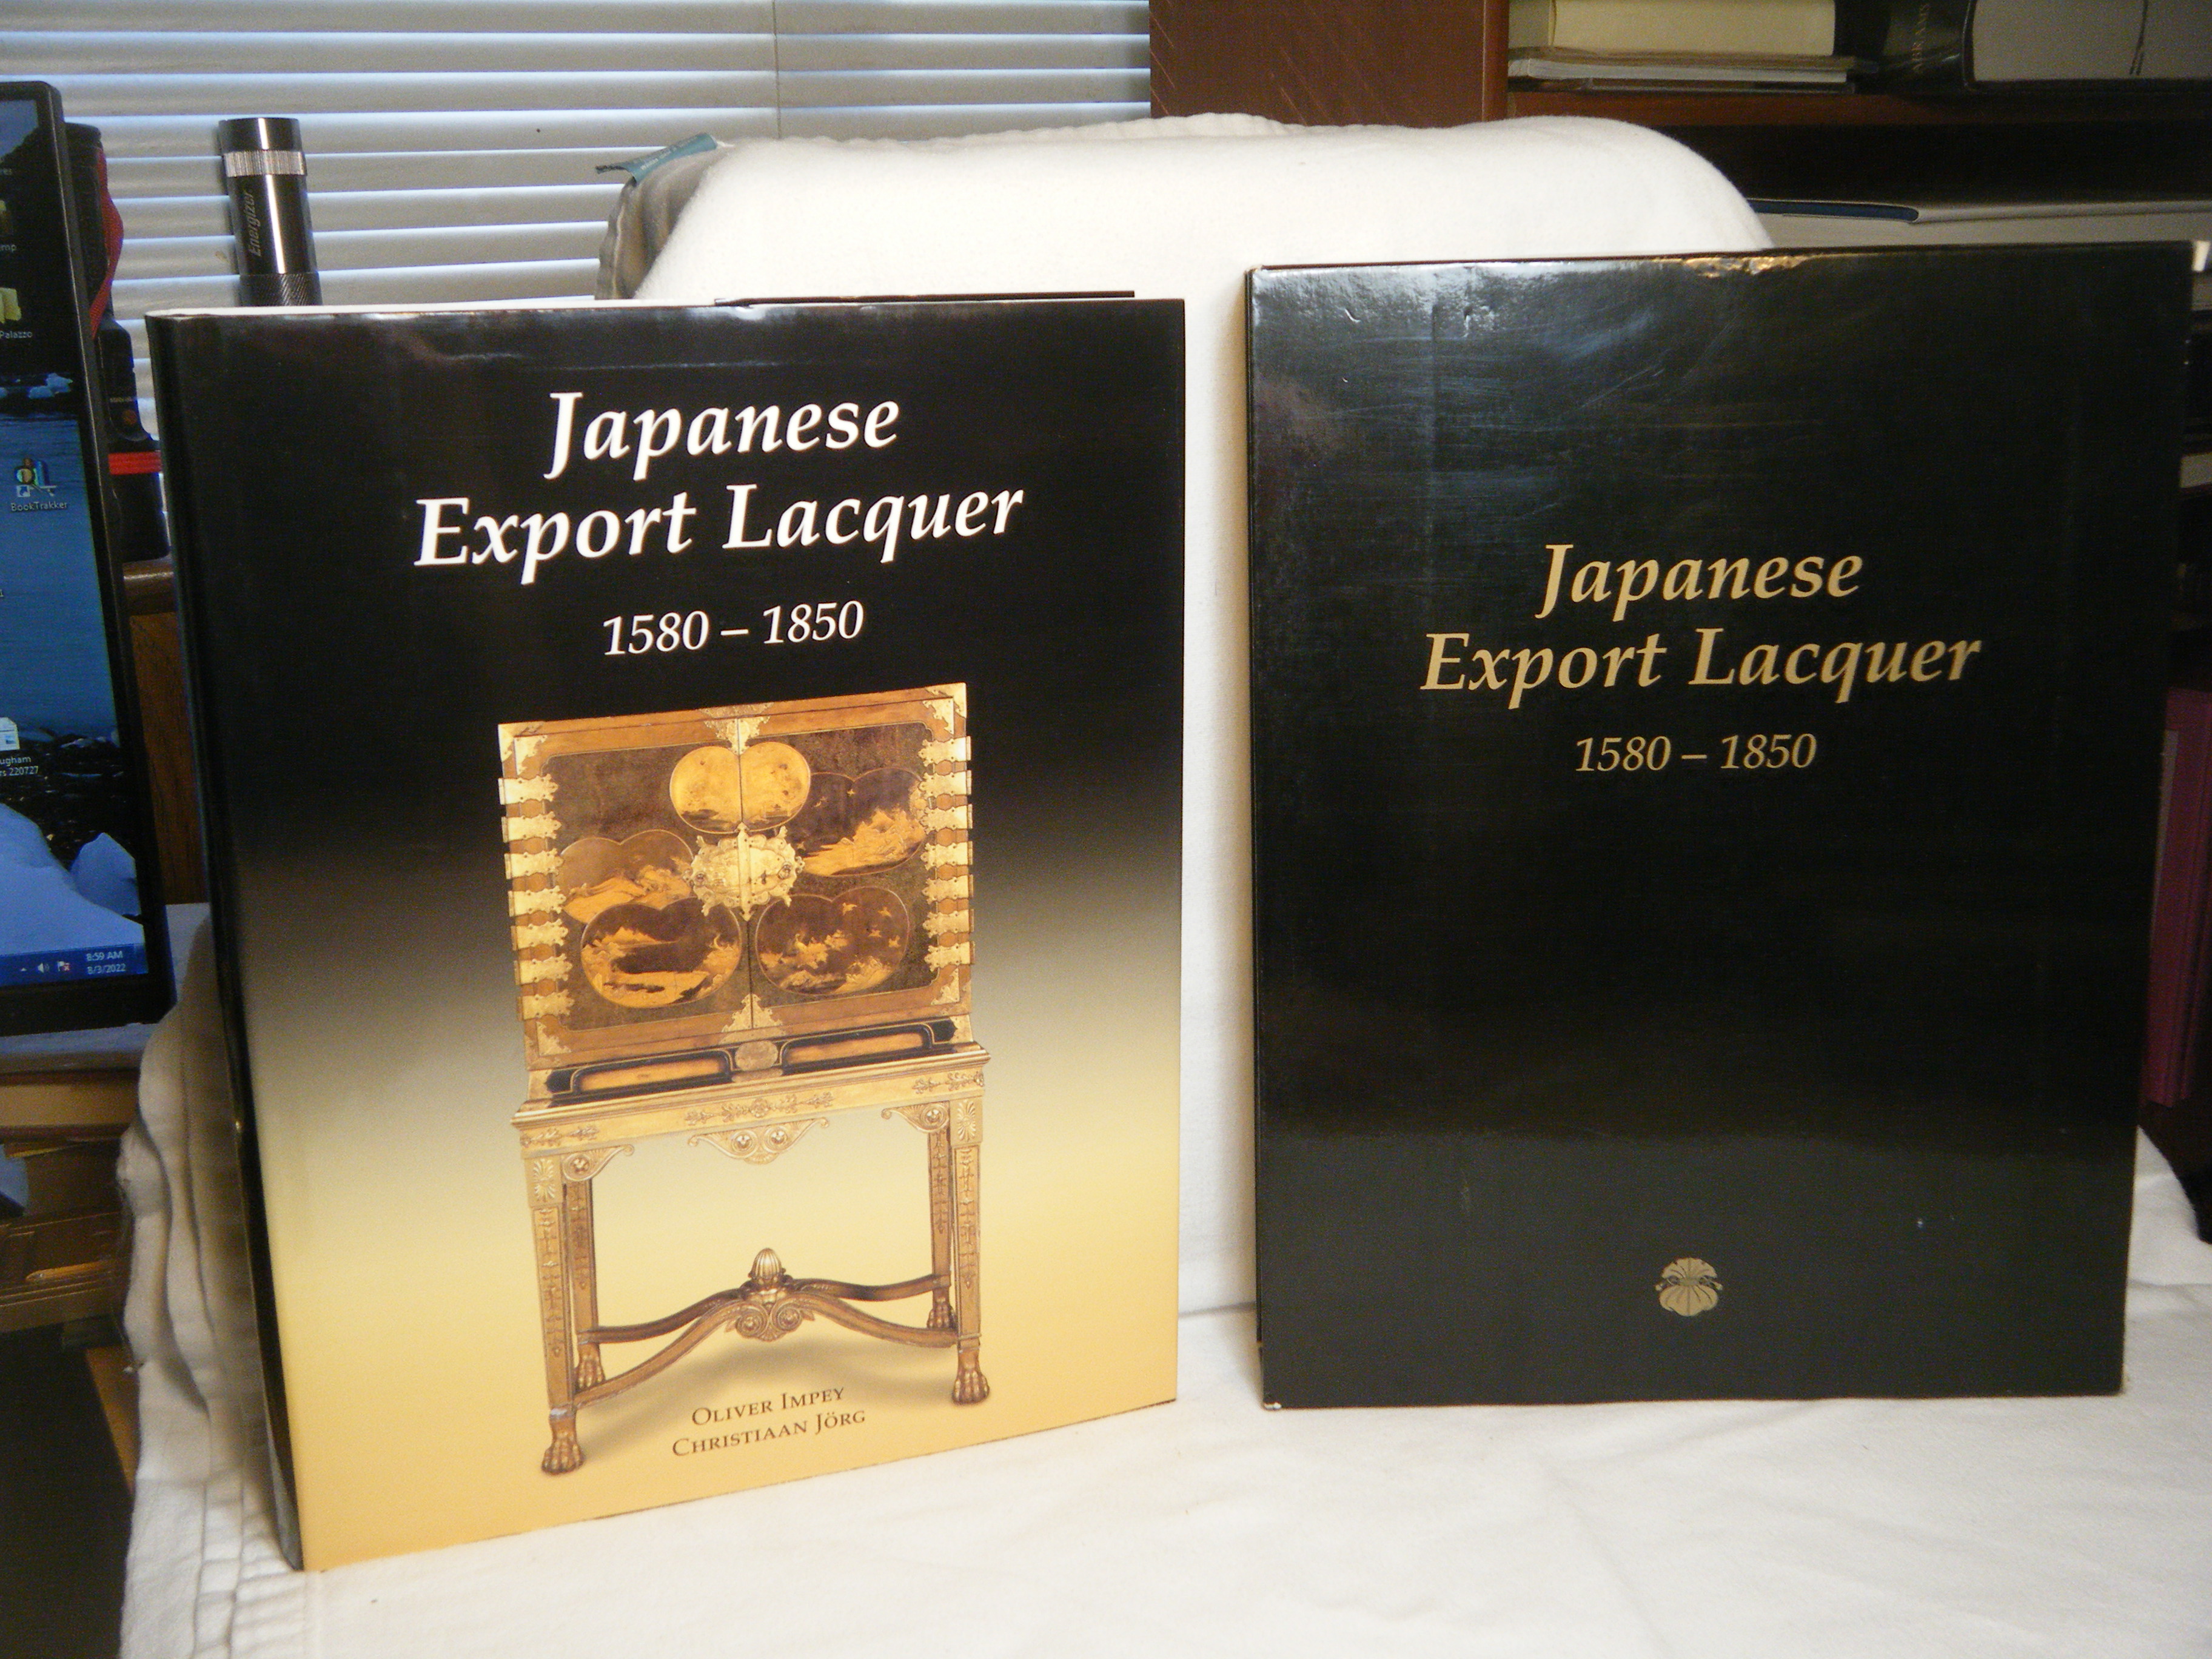 Japanese Export Lacquer - Impey, Oliver & Christiaan J. A. Jörg & Cynthia Viallé